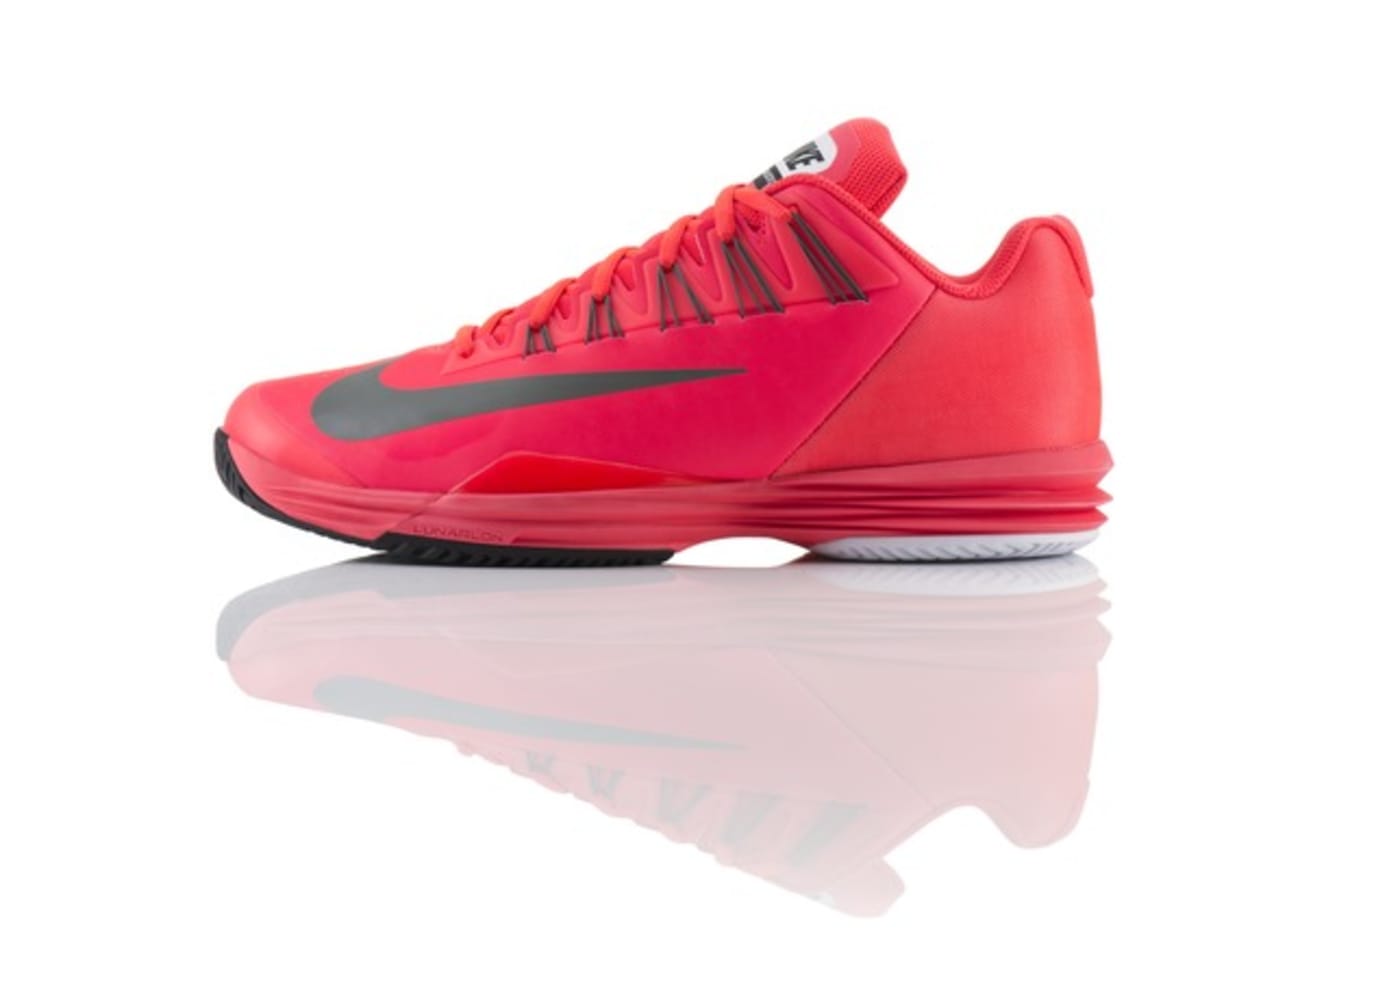 Nike’s Lunar Ballistec Is the Early Pick for Best Tennis Shoe of 2014 ...